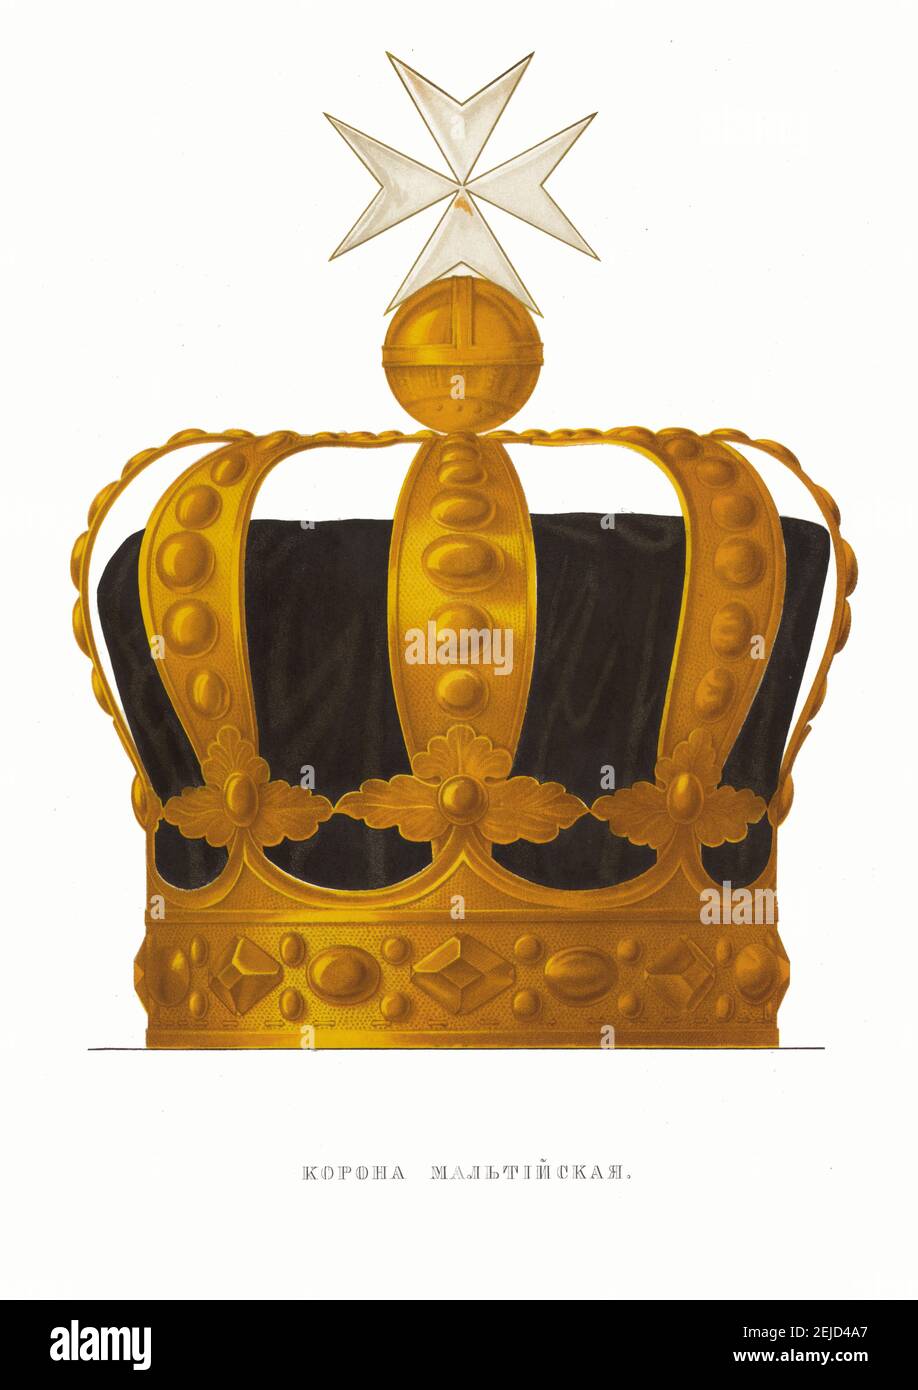 The Maltese crown of Tsar Paul I. From the Antiquities of the Russian State. Museum: PRIVATE COLLECTION. Author: Fyodor Grigoryevich Solntsev. Stock Photo